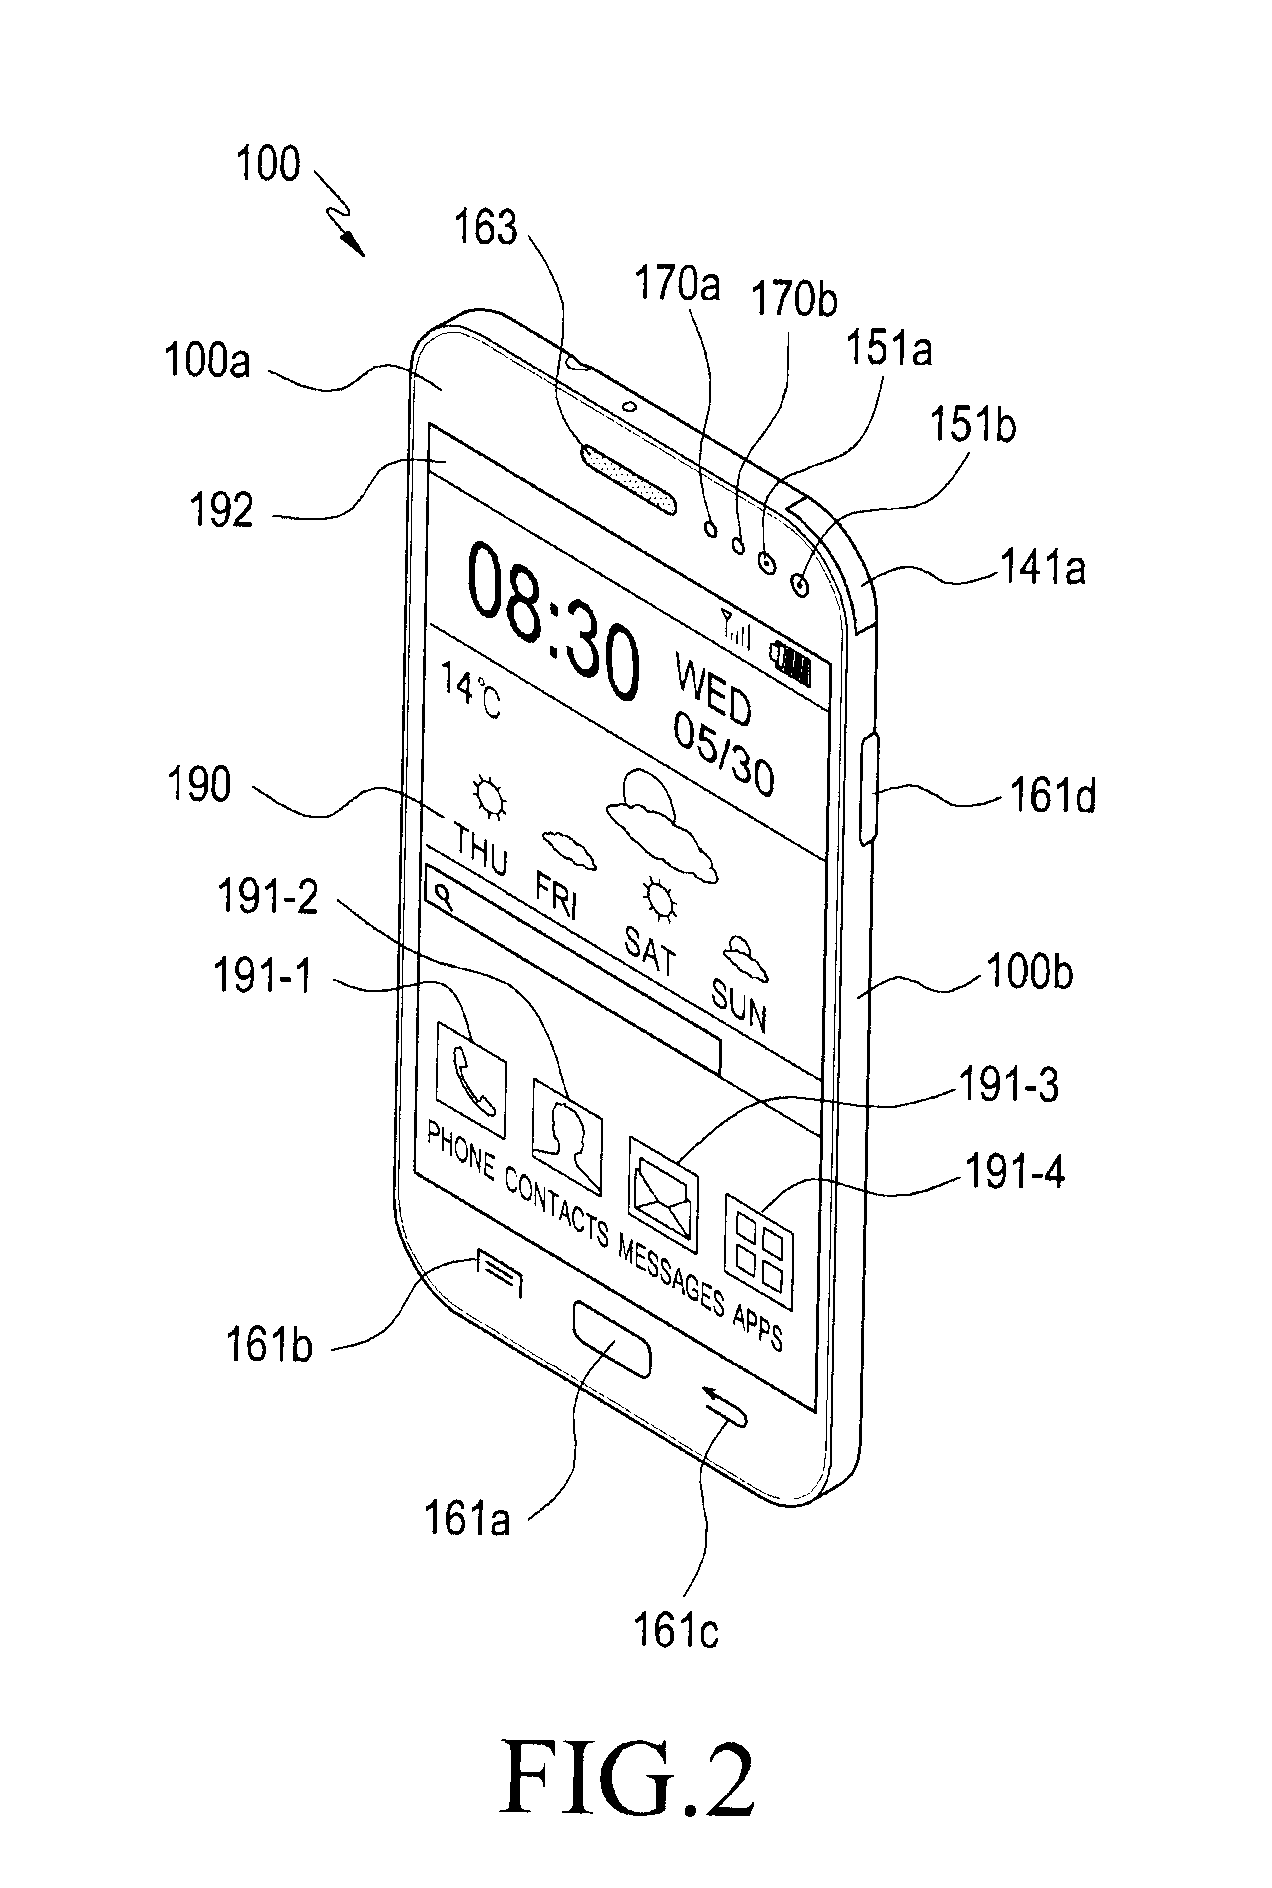 Electronic device and method for controlling image display